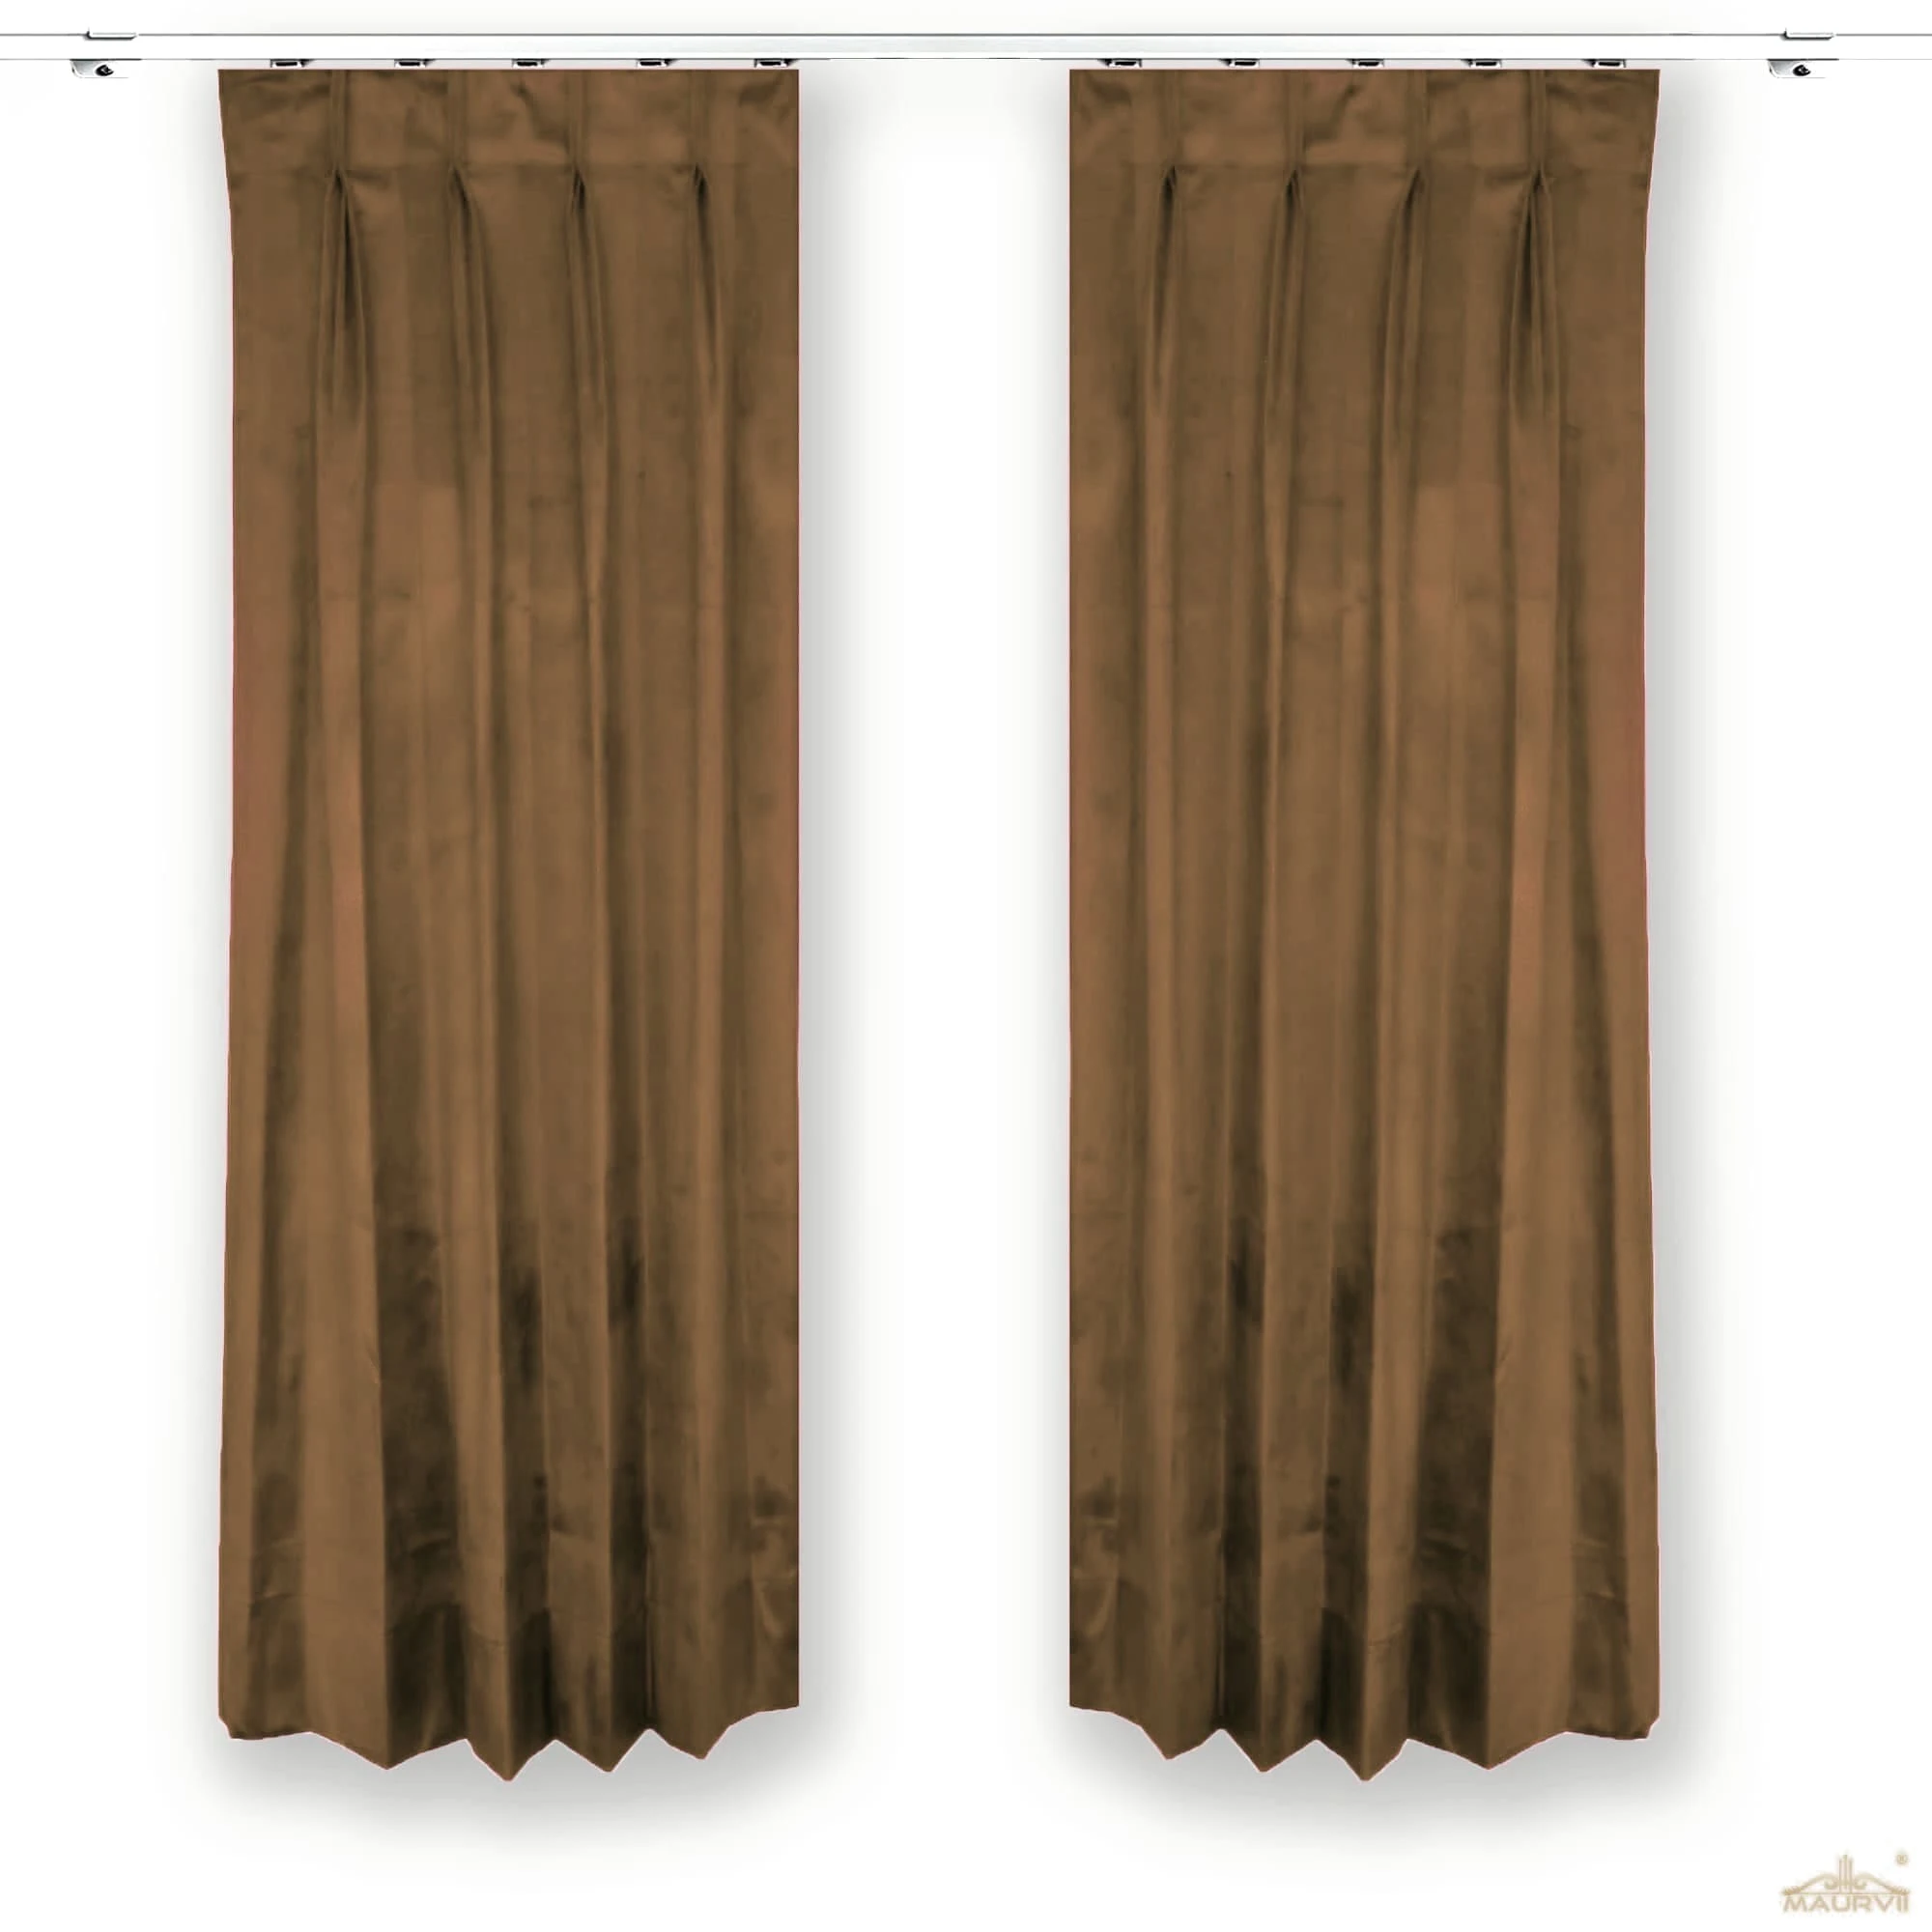 Brown living room curtains